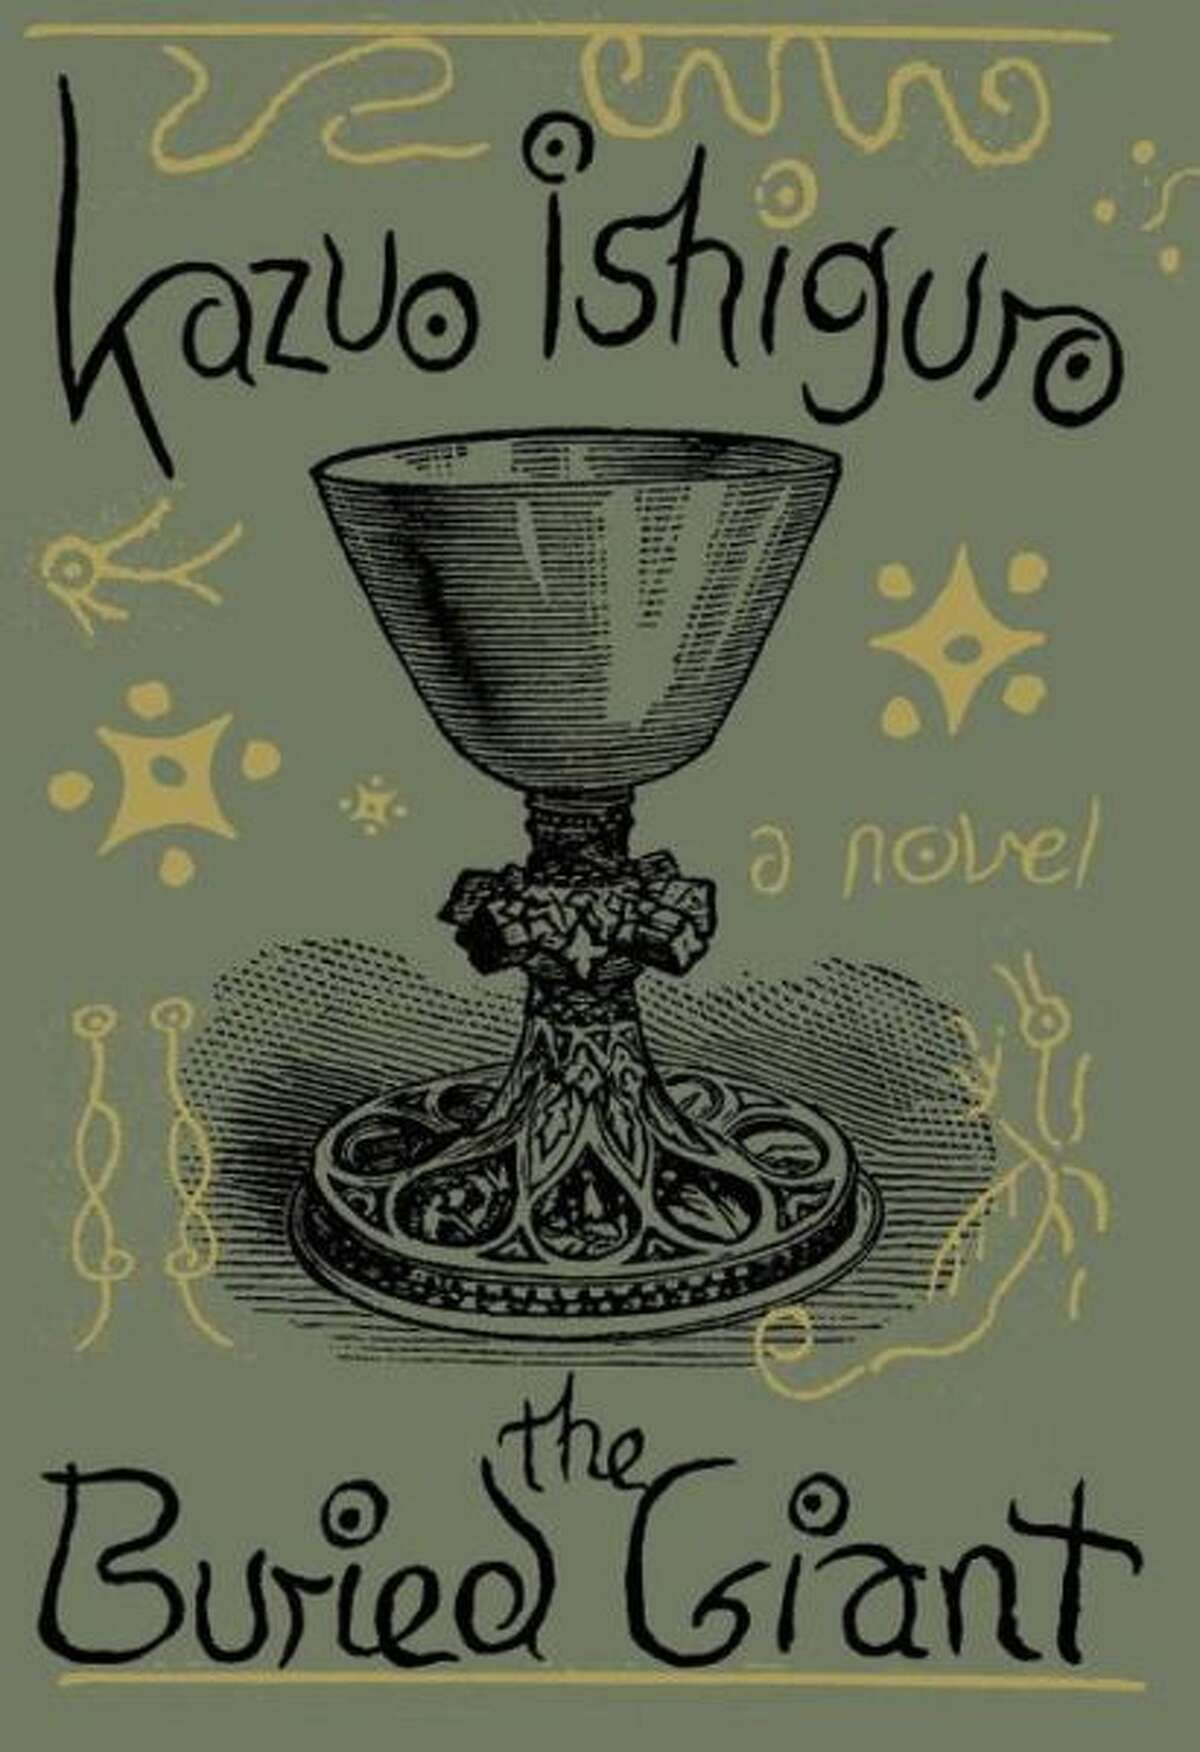 "The Buried Giant" by Kazuo Ishiguro